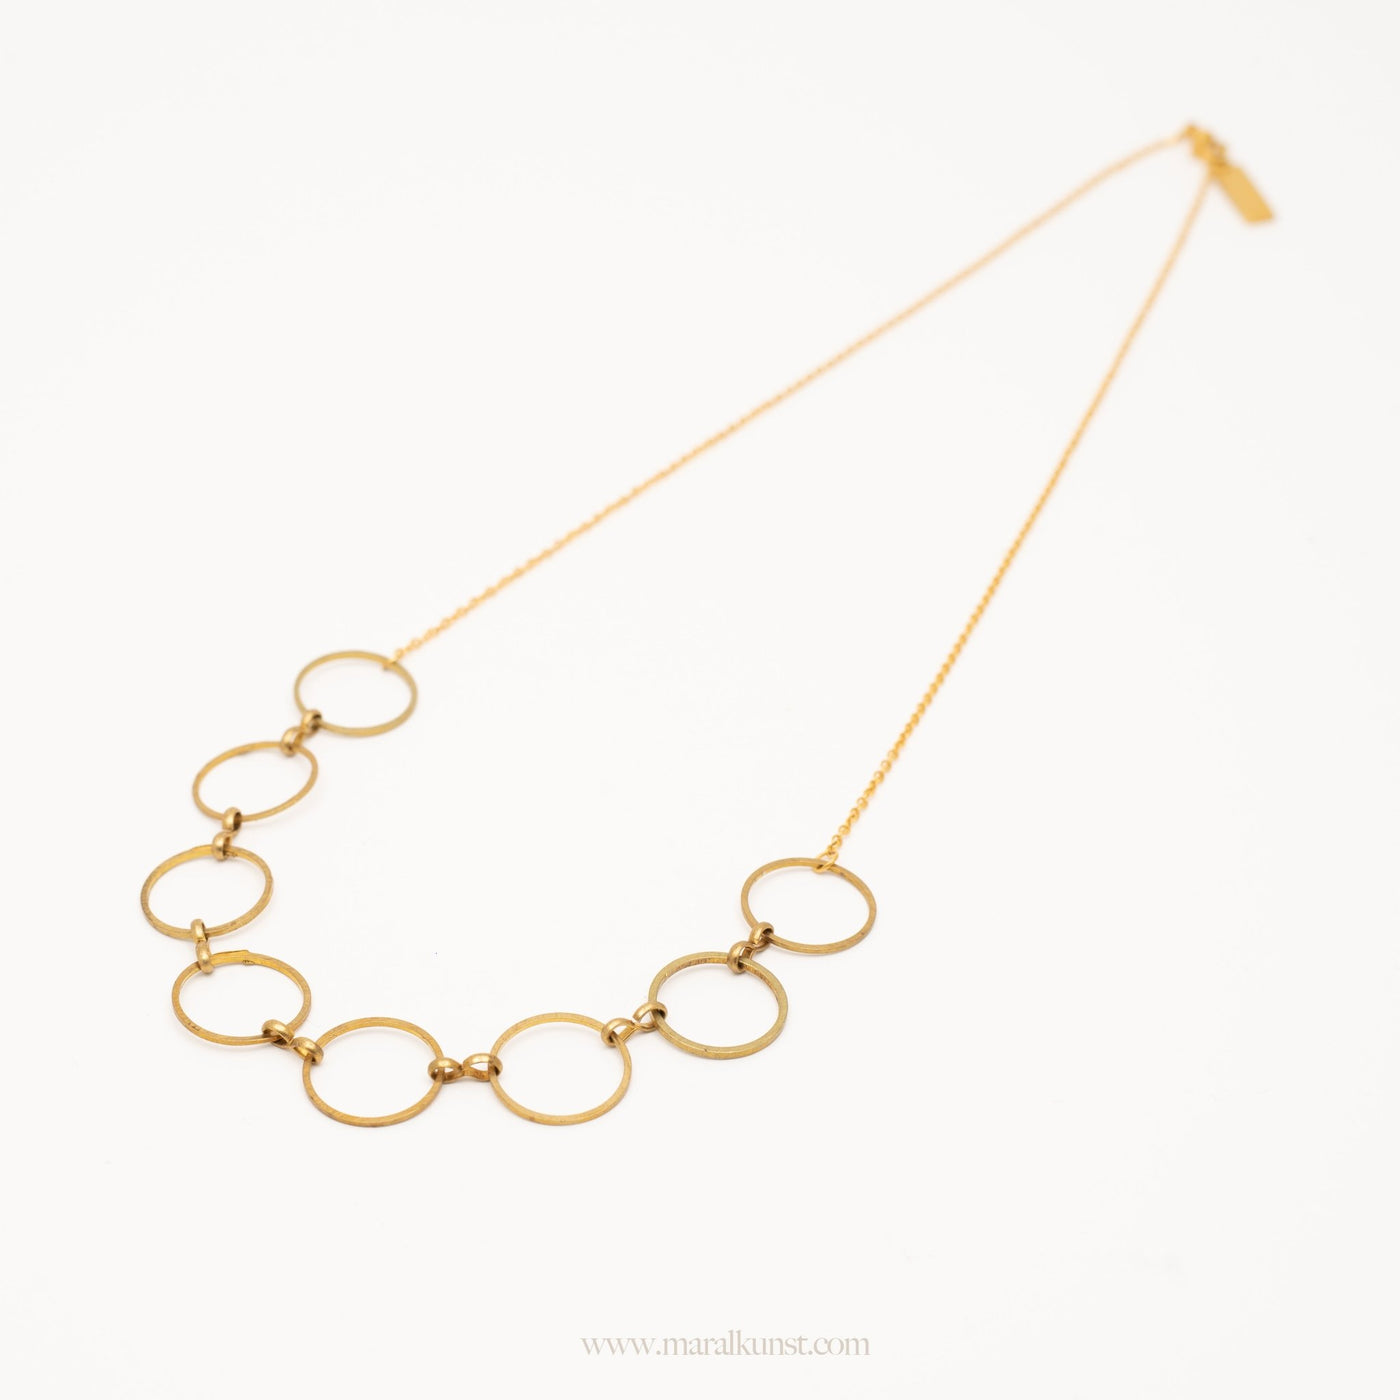 Brass and stainless steel chain - Maral Kunst Jewelry